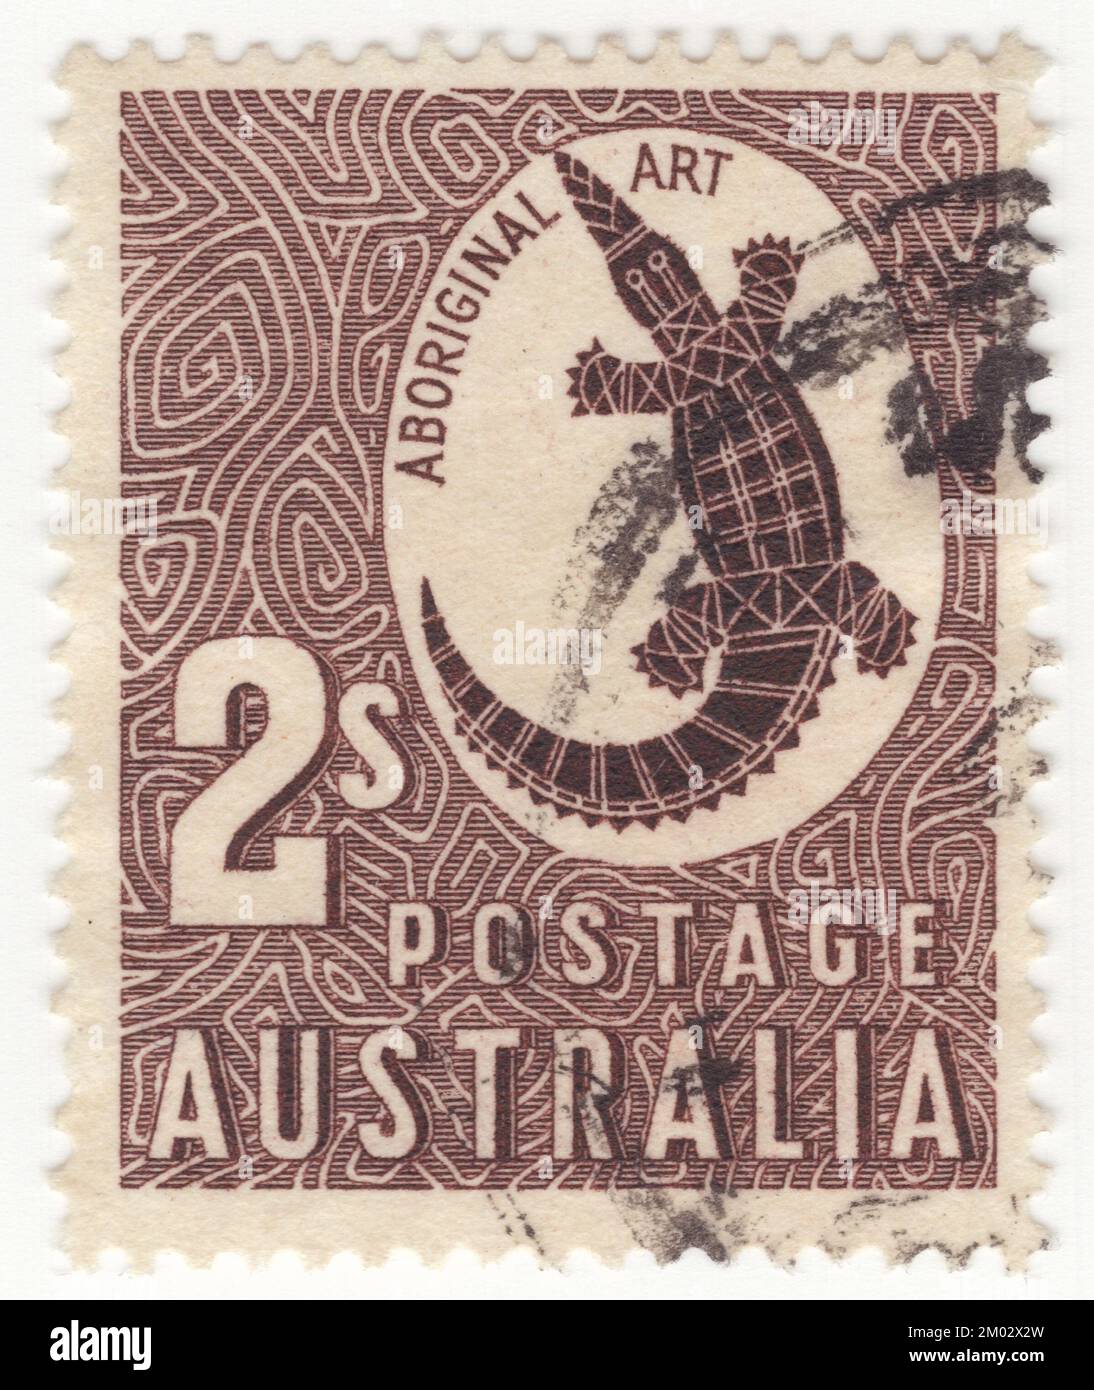 AUSTRALIA — 1948 February 16: An 2 shillings chocolate postage stamp depicting a Сrocodile as an example of Aboriginal art. The freshwater crocodile (Crocodylus johnstoni), also known as the Australian freshwater crocodile, Johnstone's crocodile or the freshie, is a species of crocodile endemic to the northern regions of Australia. Unlike their much larger Australian relative, the saltwater crocodile, freshwater crocodiles are not known as man-eaters, although they bite in self defence, and brief, nonfatal attacks have occurred, apparently the result of mistaken identity Stock Photo